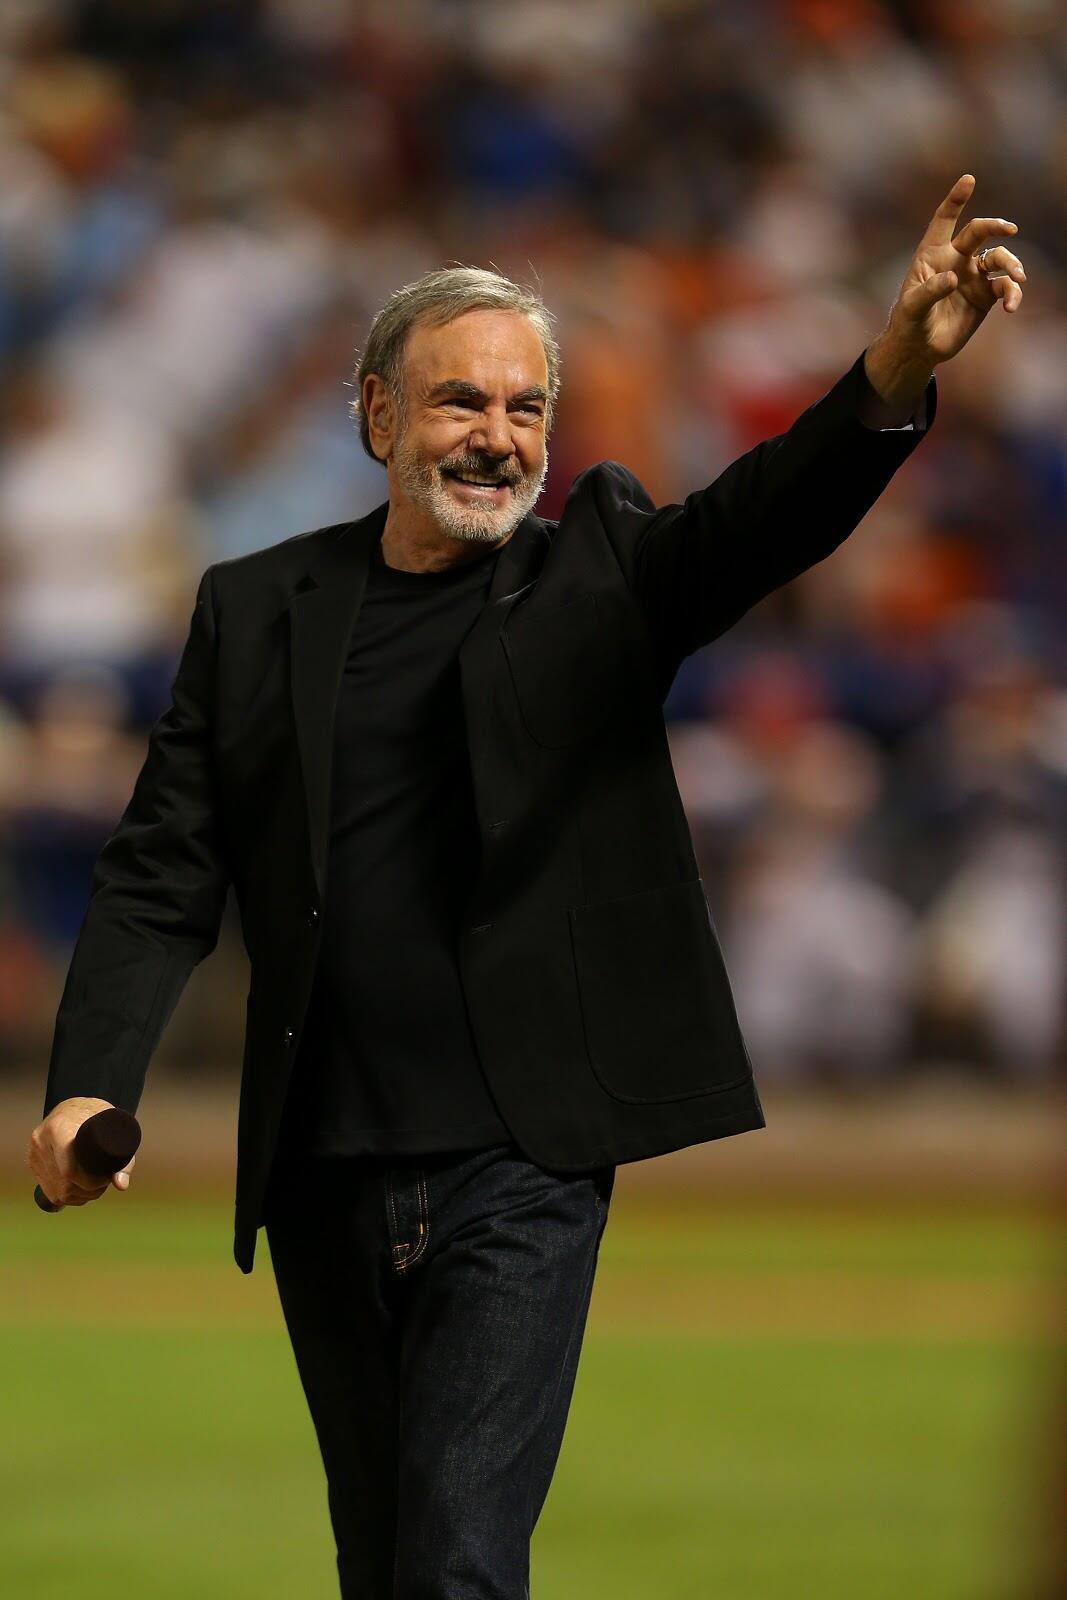 NEW YORK, NY - JULY 16:  Singer Neil Diamond performs during the 84th MLB All-Star Game on July 16, 2013 at Citi Field in the Flushing neighborhood of the Queens borough of New York City.  (Photo by Mike Ehrmann/Getty Images)